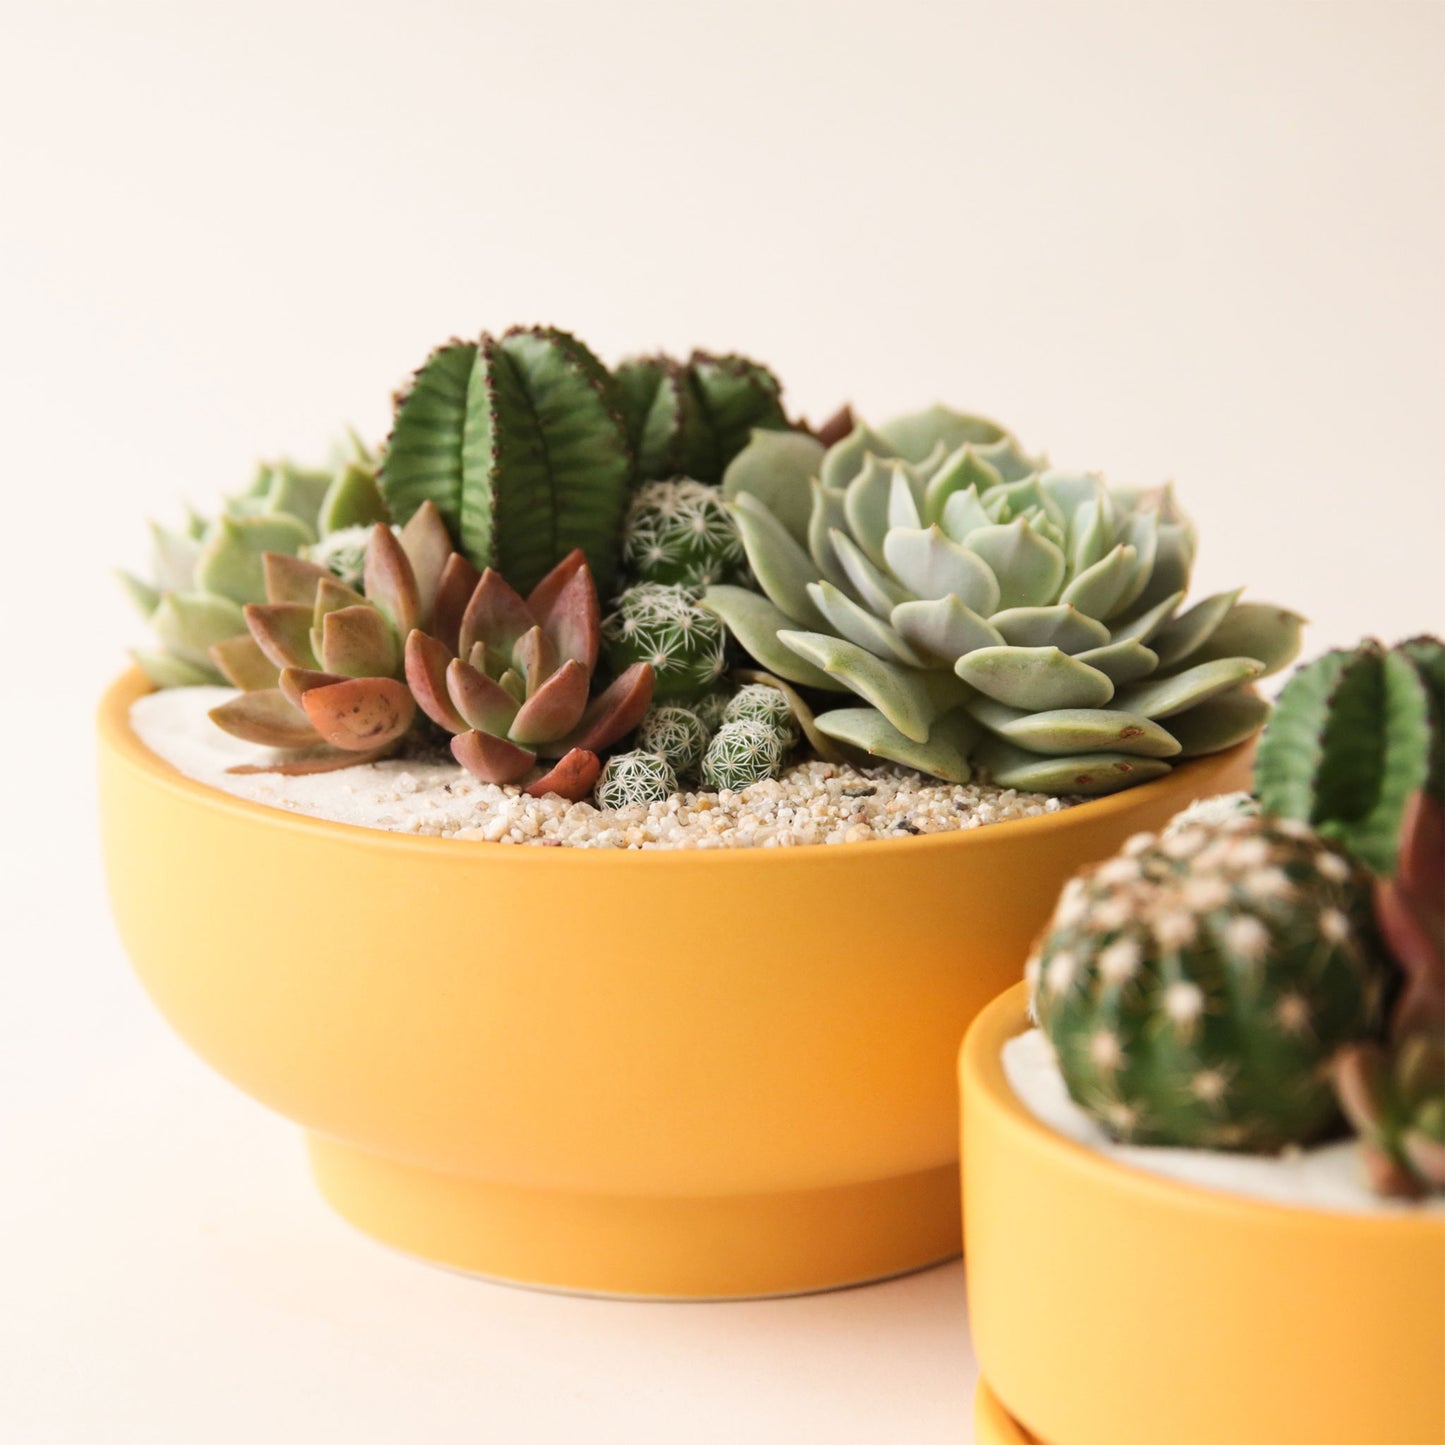 On a cream background is a yellow ceramic pedestal bowl with a succulent and cacti arrangement inside. 